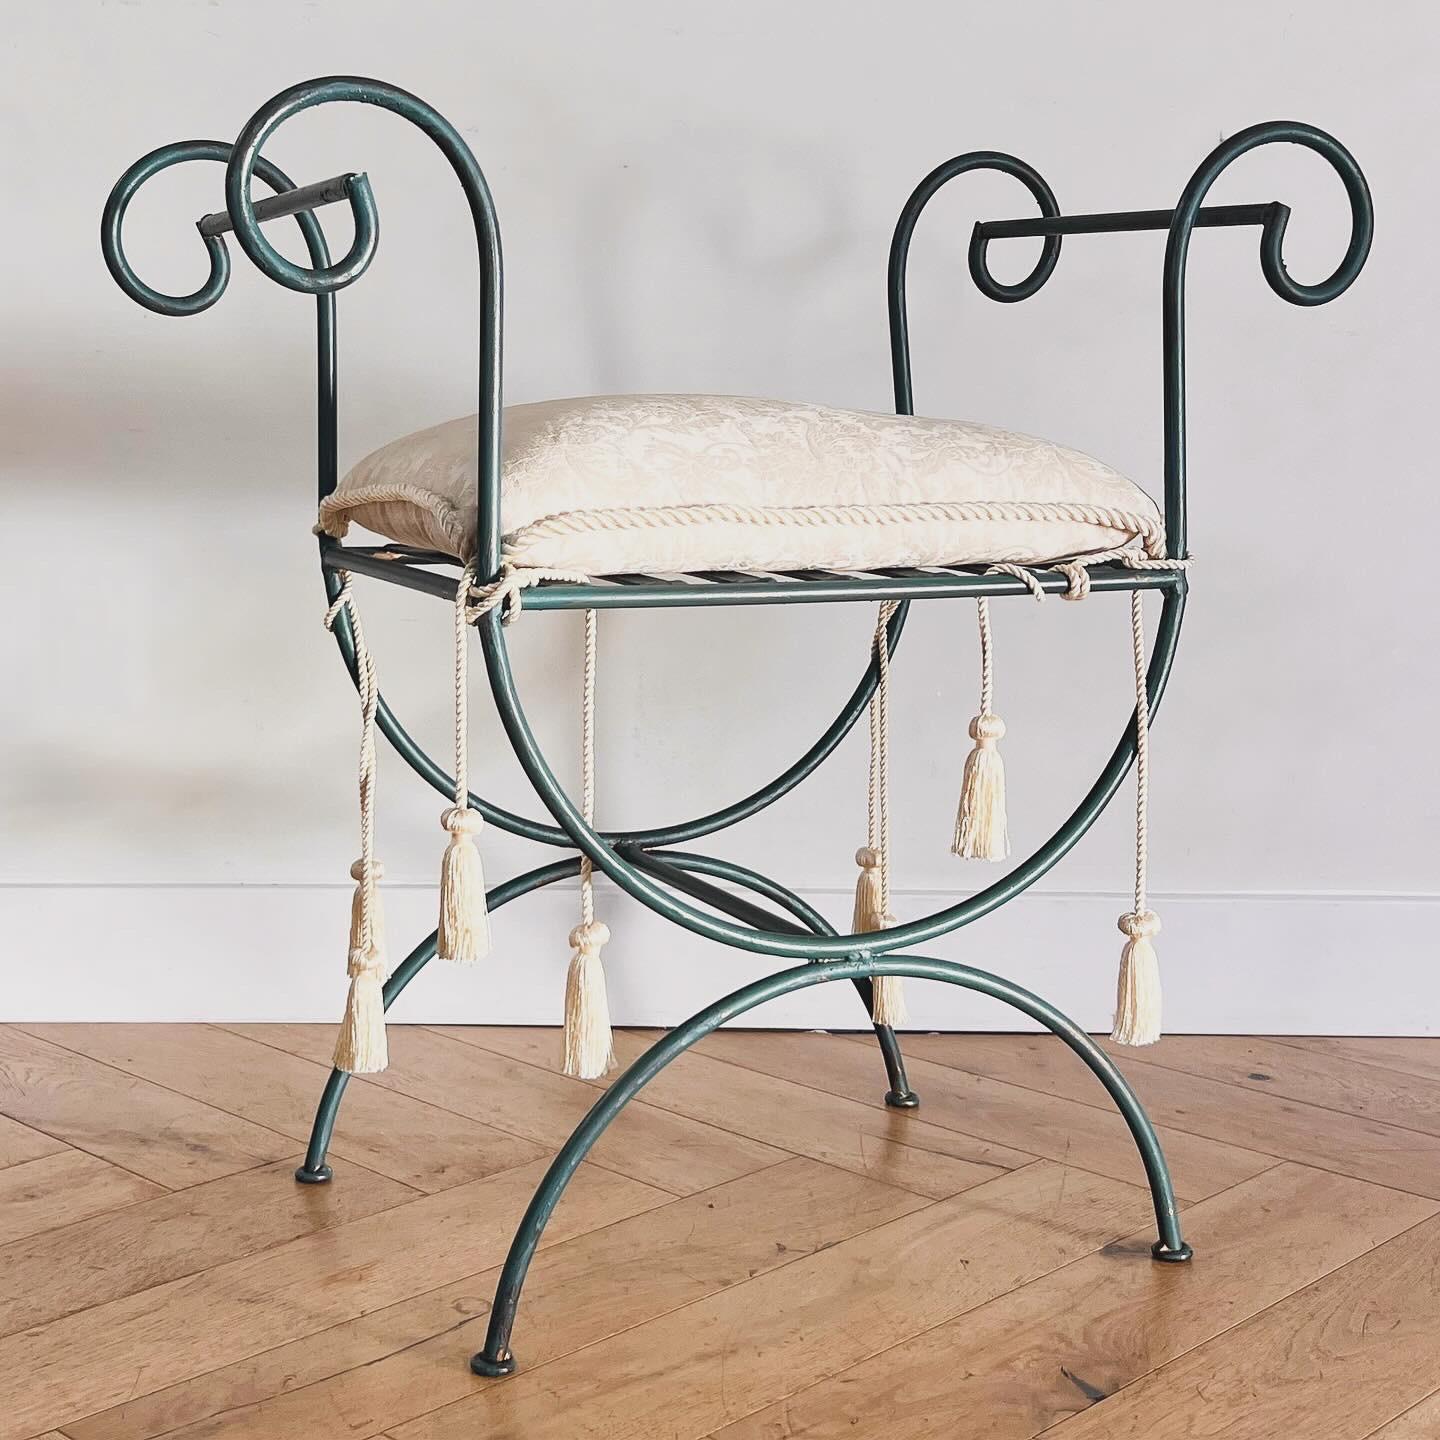 20th Century Vintage iron vanity stool with tasseled seat pillow, 20th century  For Sale